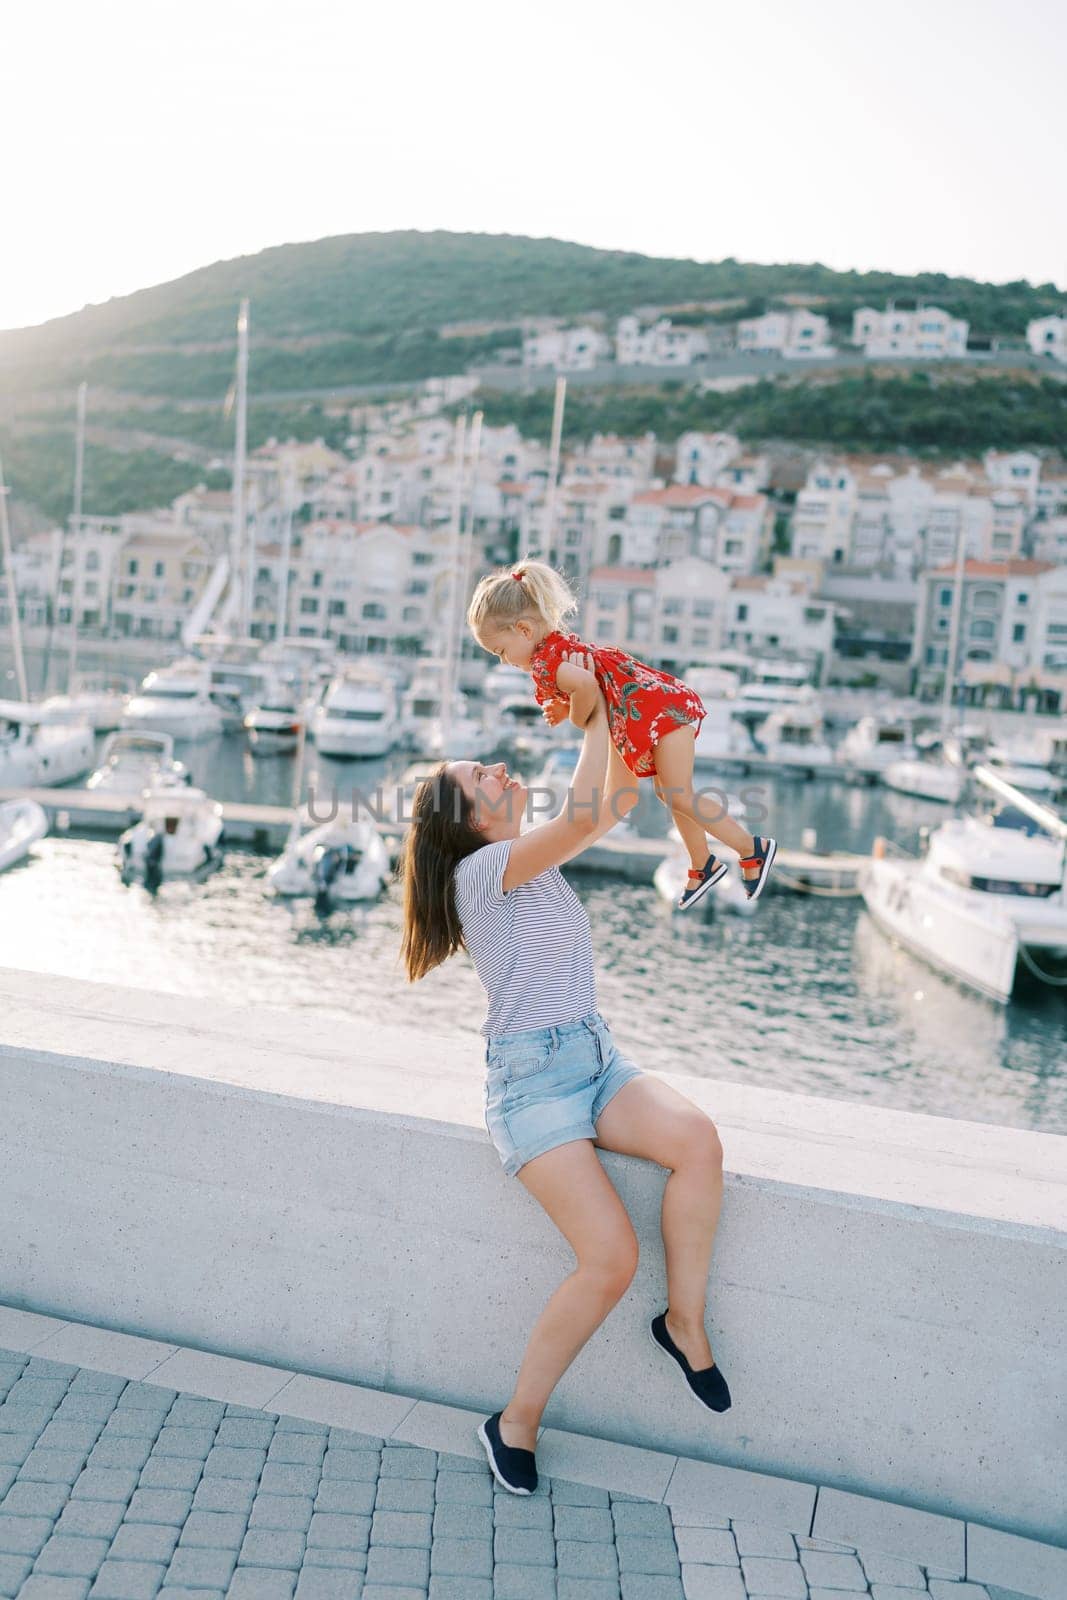 Mom raises a little girl in outstretched arms while sitting on the fence of the boardwalk with moored yachts. High quality photo